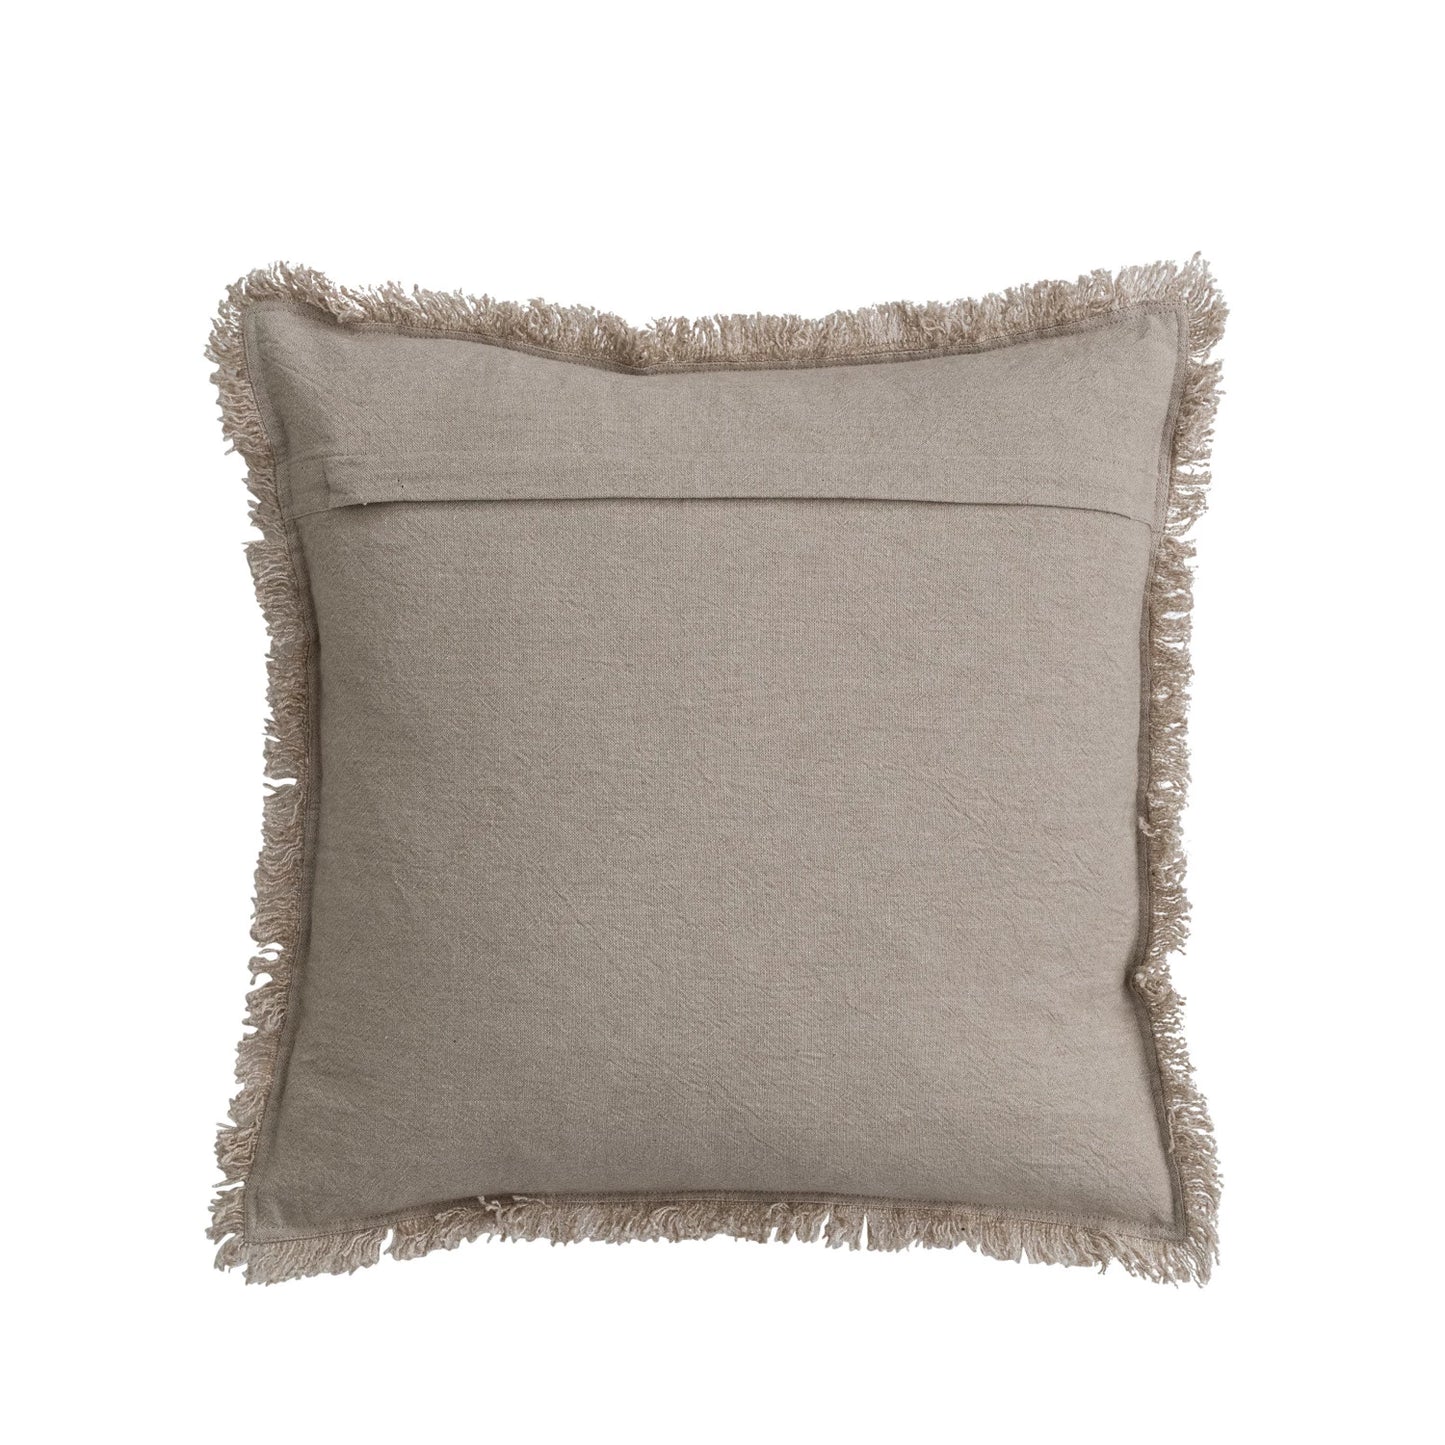 Woven Grid Pillow with Fringe, 18x18